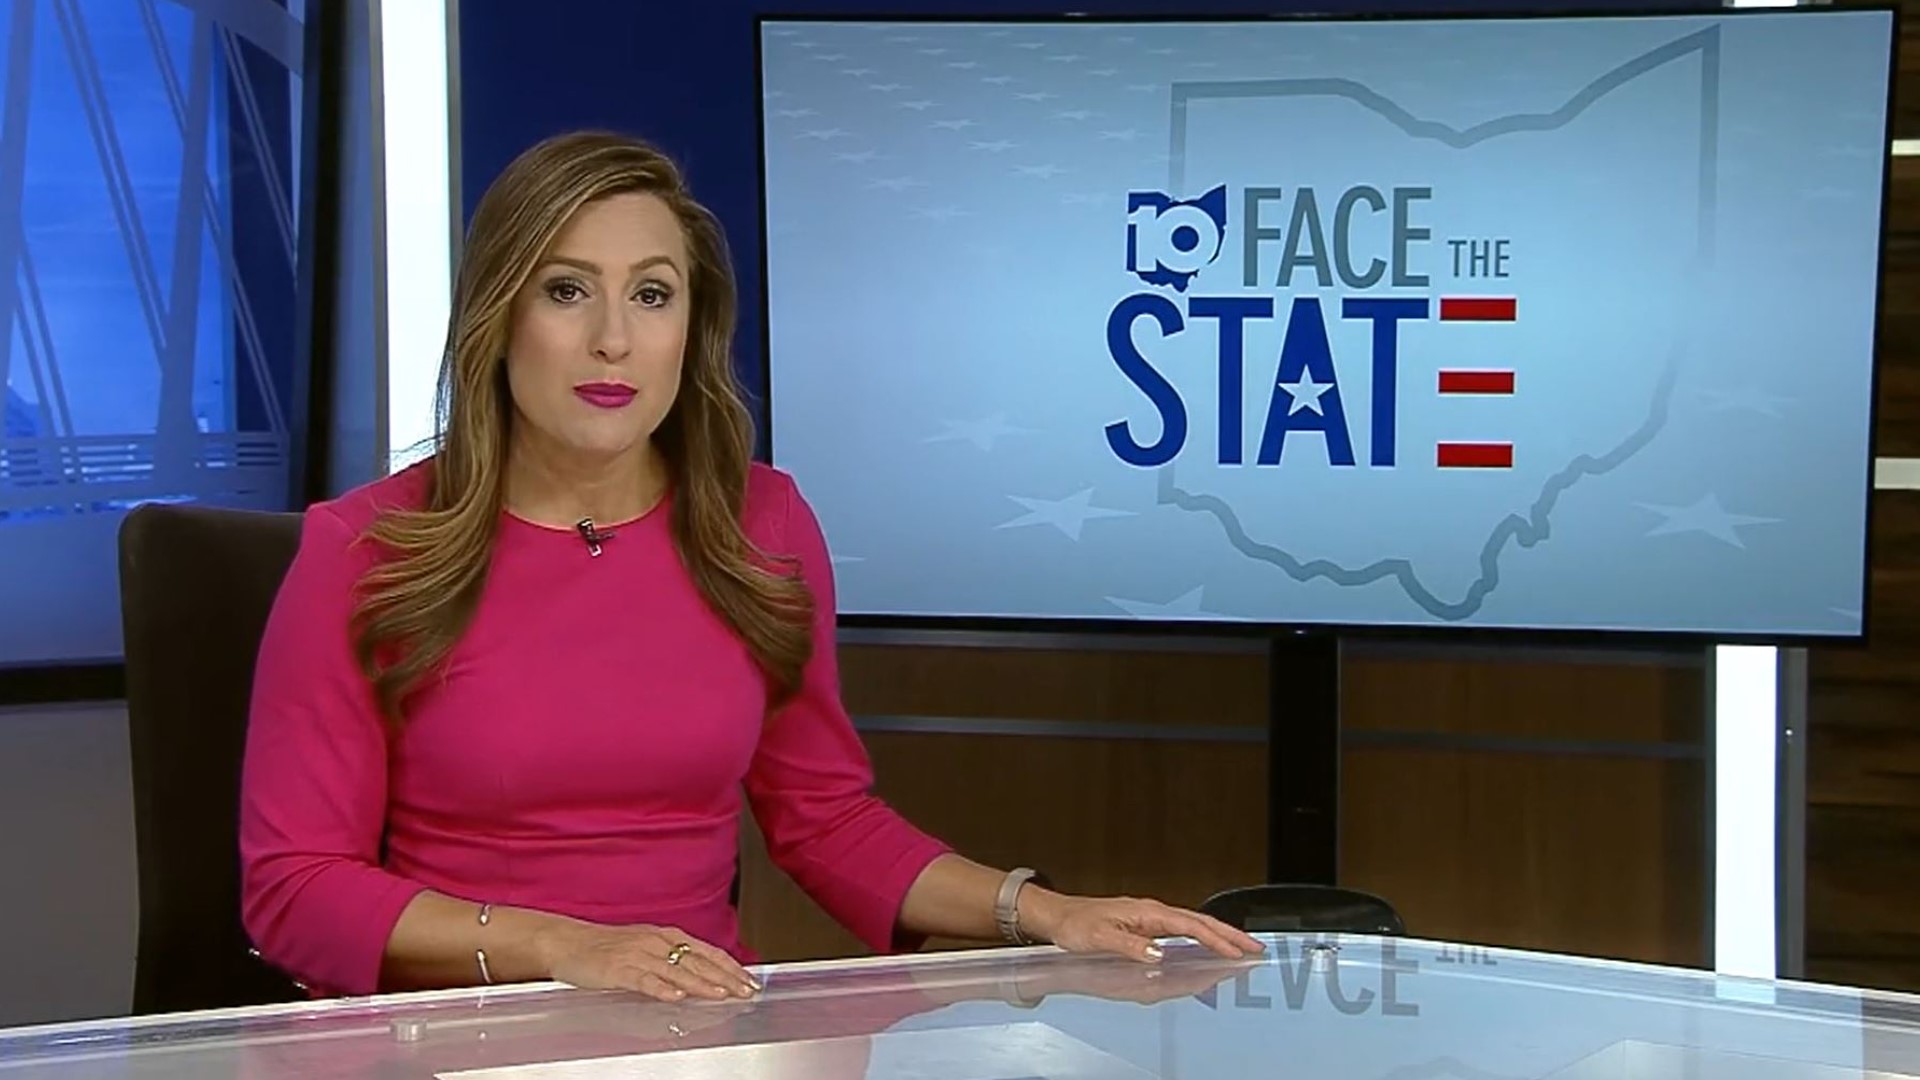 This week's "Face the State" discusses the plan for the COVID-19 vaccine in Ohio and the status of plasma donations.